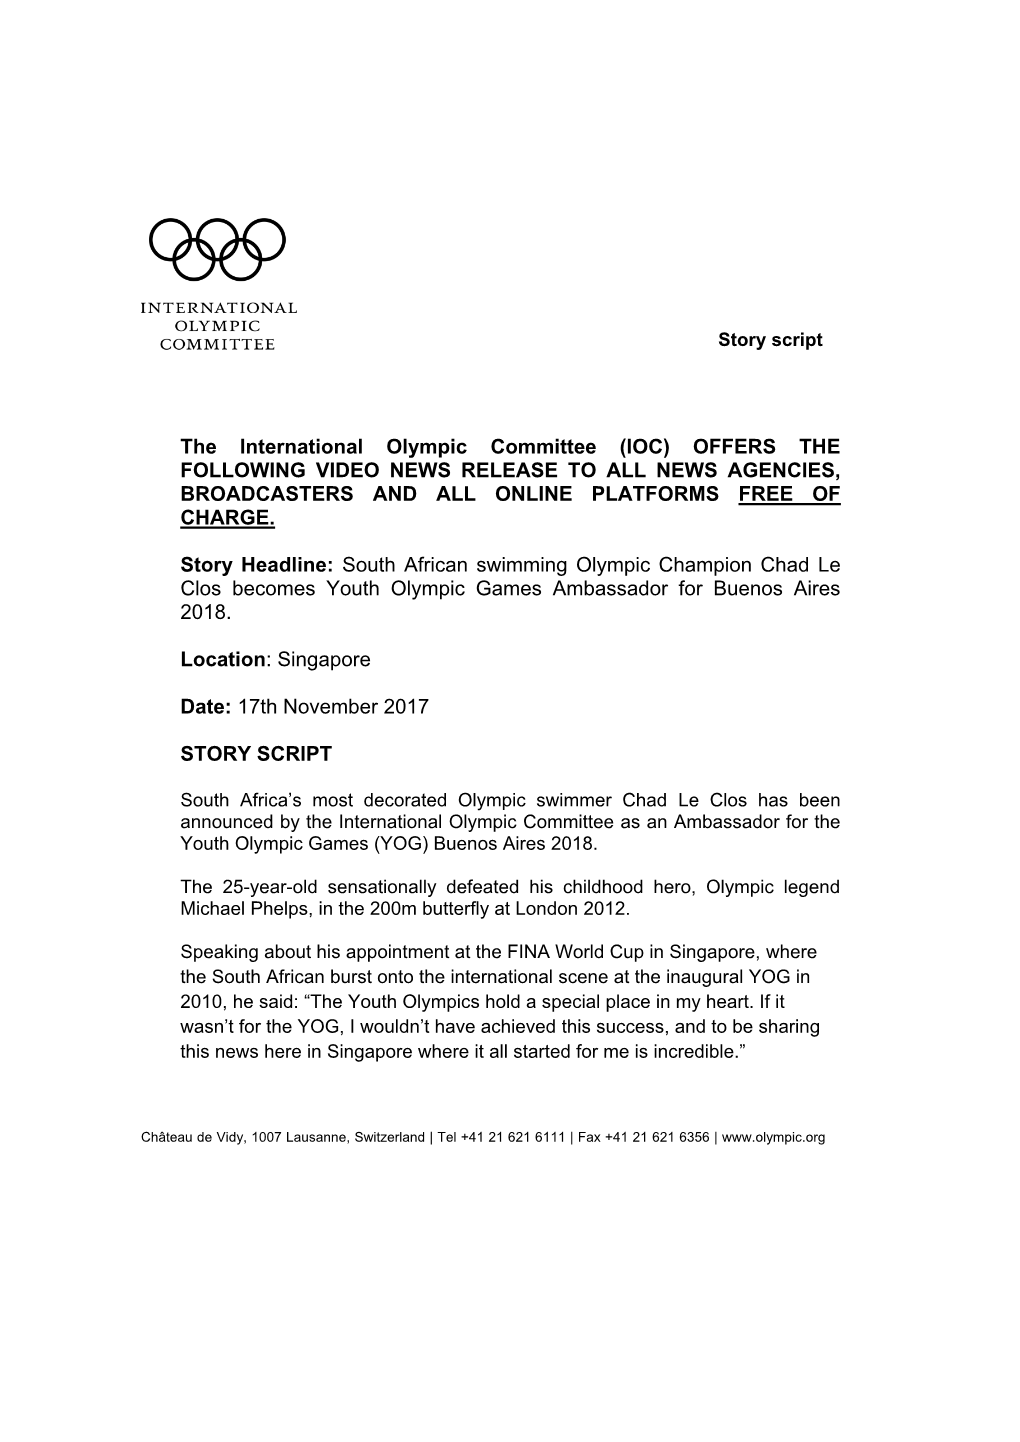 The International Olympic Committee (IOC) OFFERS the FOLLOWING VIDEO NEWS RELEASE to ALL NEWS AGENCIES, BROADCASTERS and ALL ONLINE PLATFORMS FREE of CHARGE